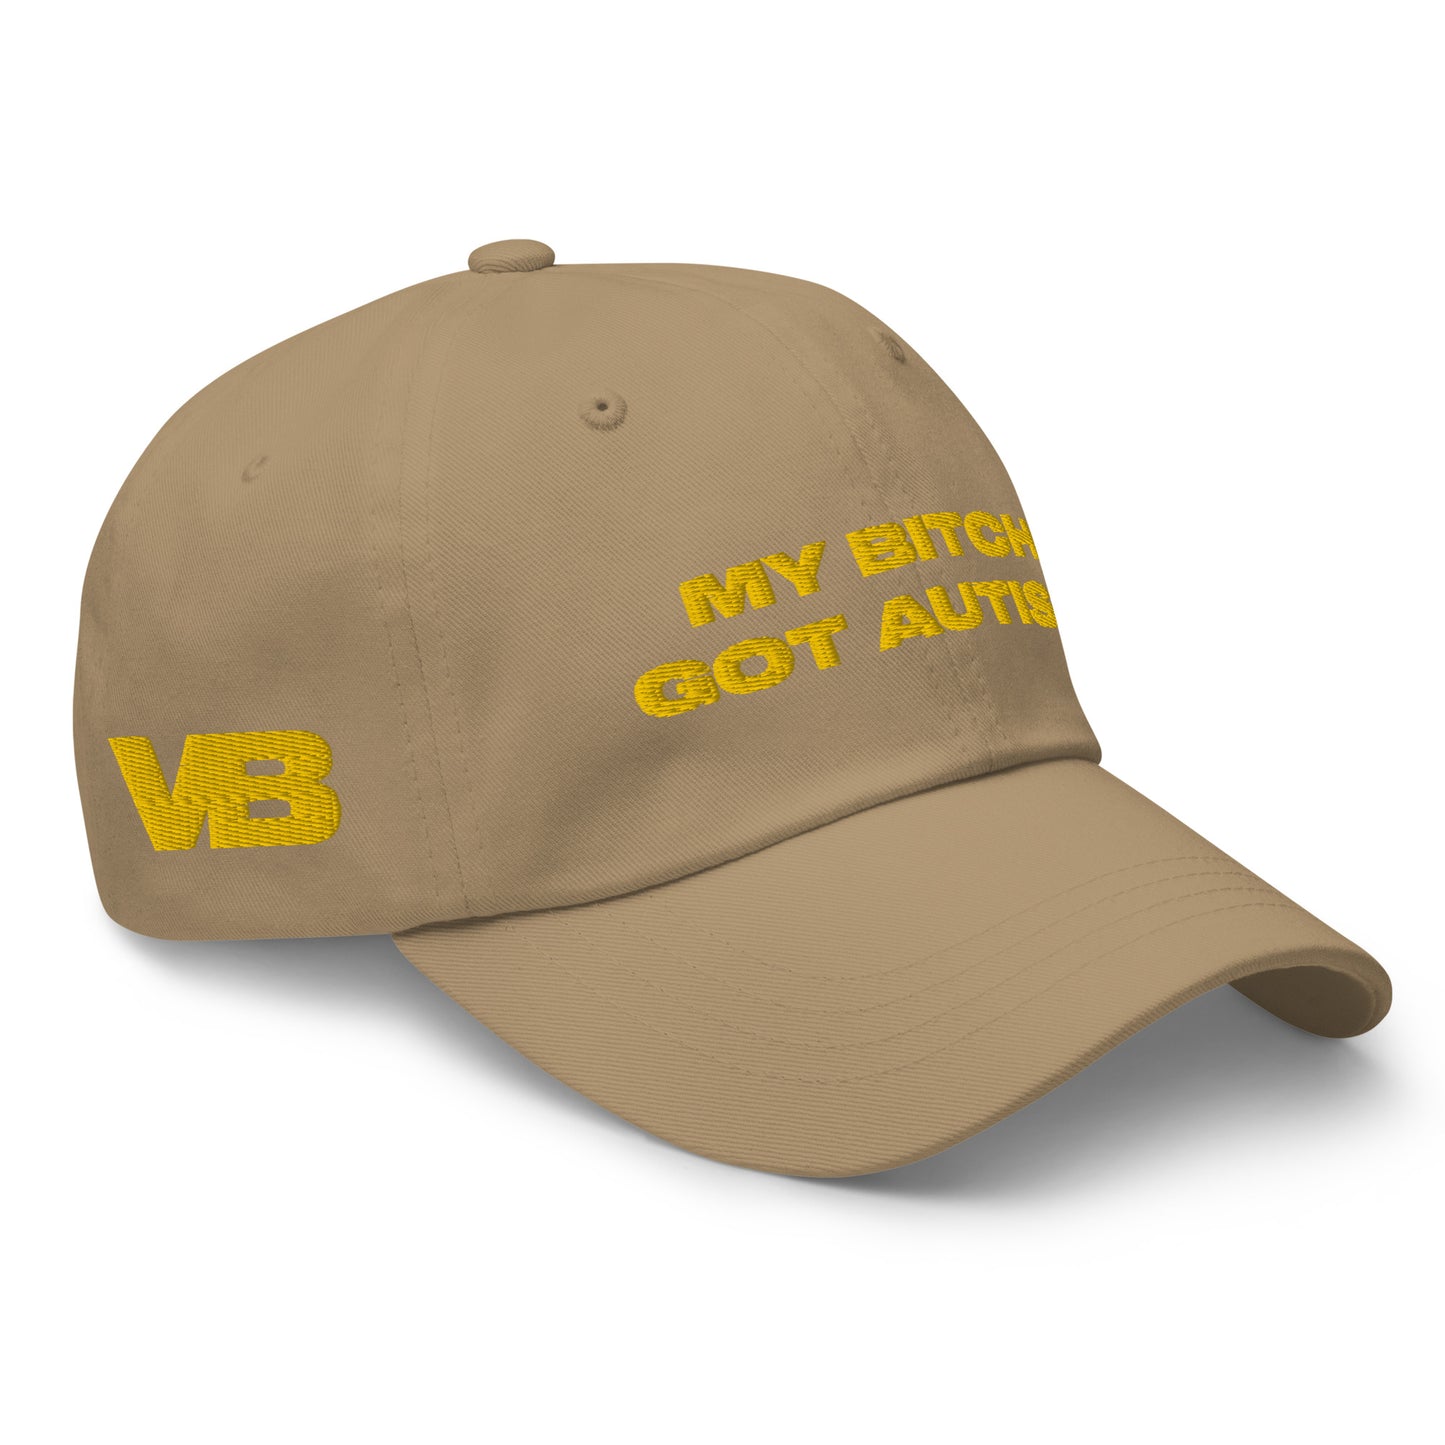 Villa Blvd My B**** Hat ☛ Multiple Colors Available ☚